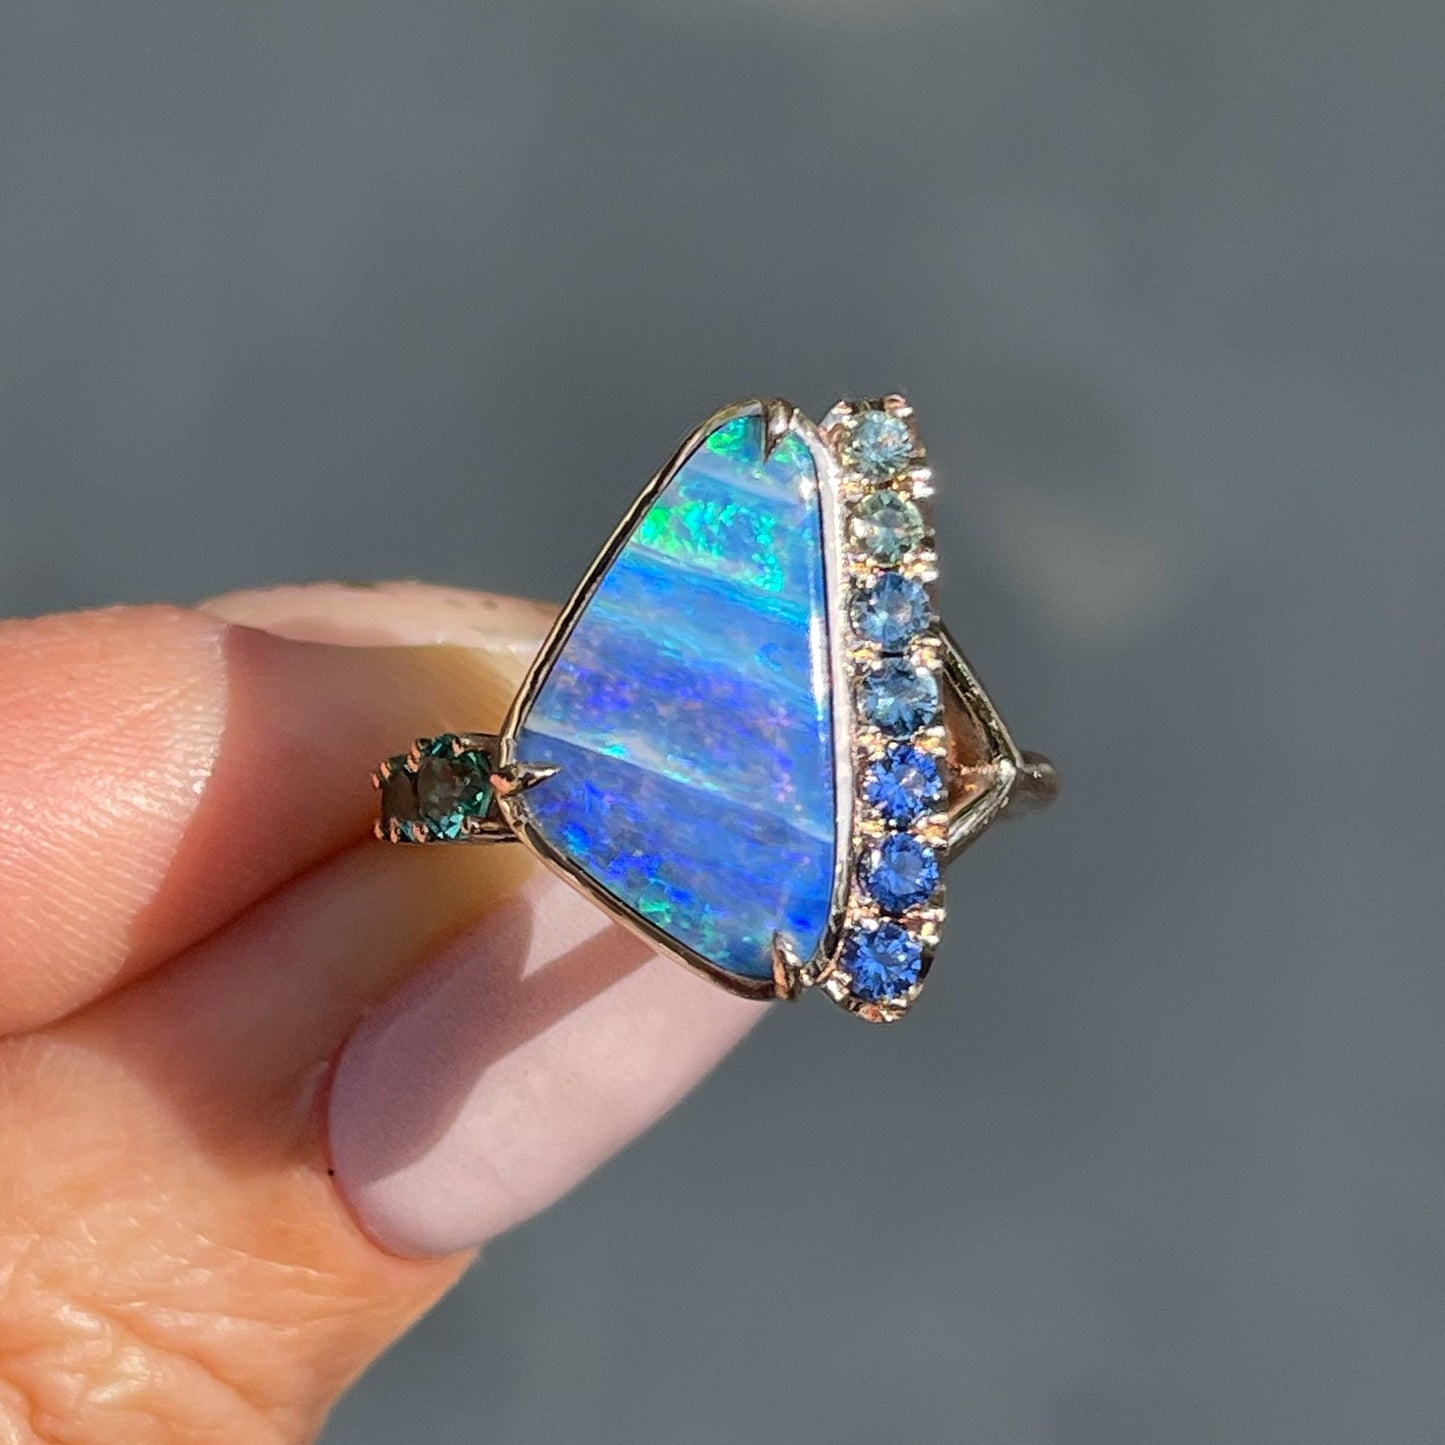 An Australian Opal Ring by NIXIN Jewelry with the opal and emeralds in prong setting.